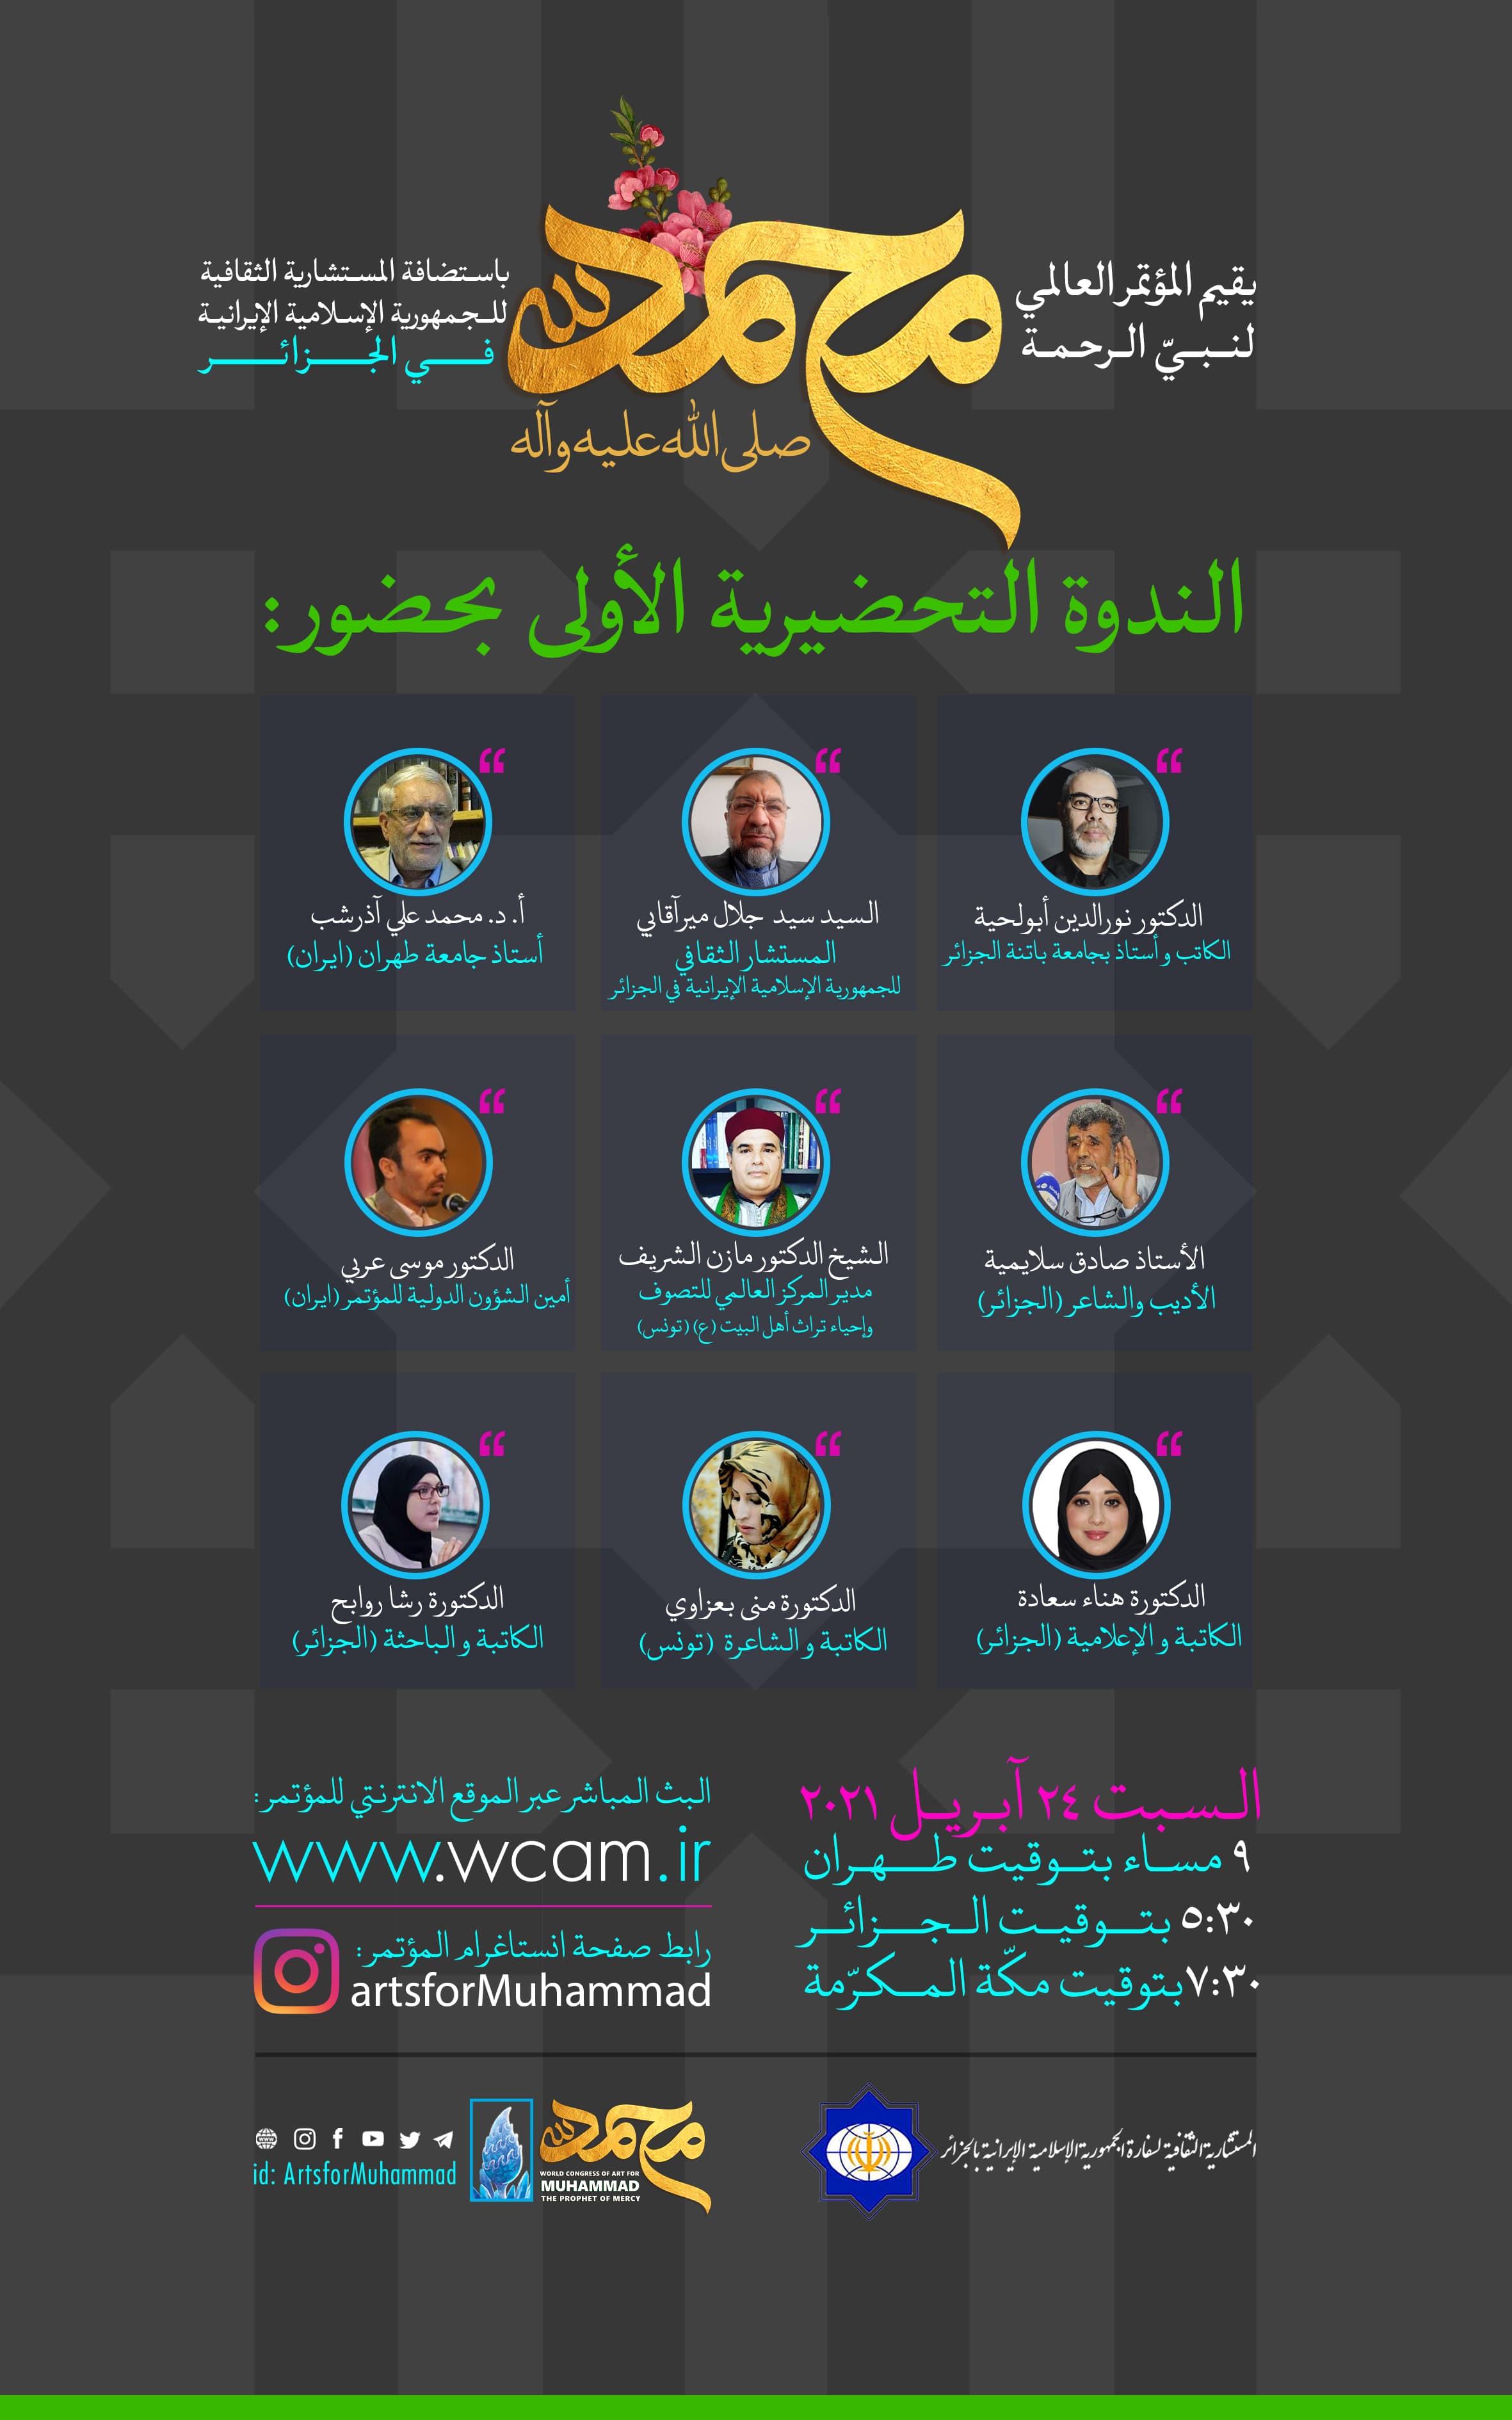 ٌWeb Conference 1: Poster unveiling ceremony of the World Congress of Arts for Muhammad (PBUH) in Algeria